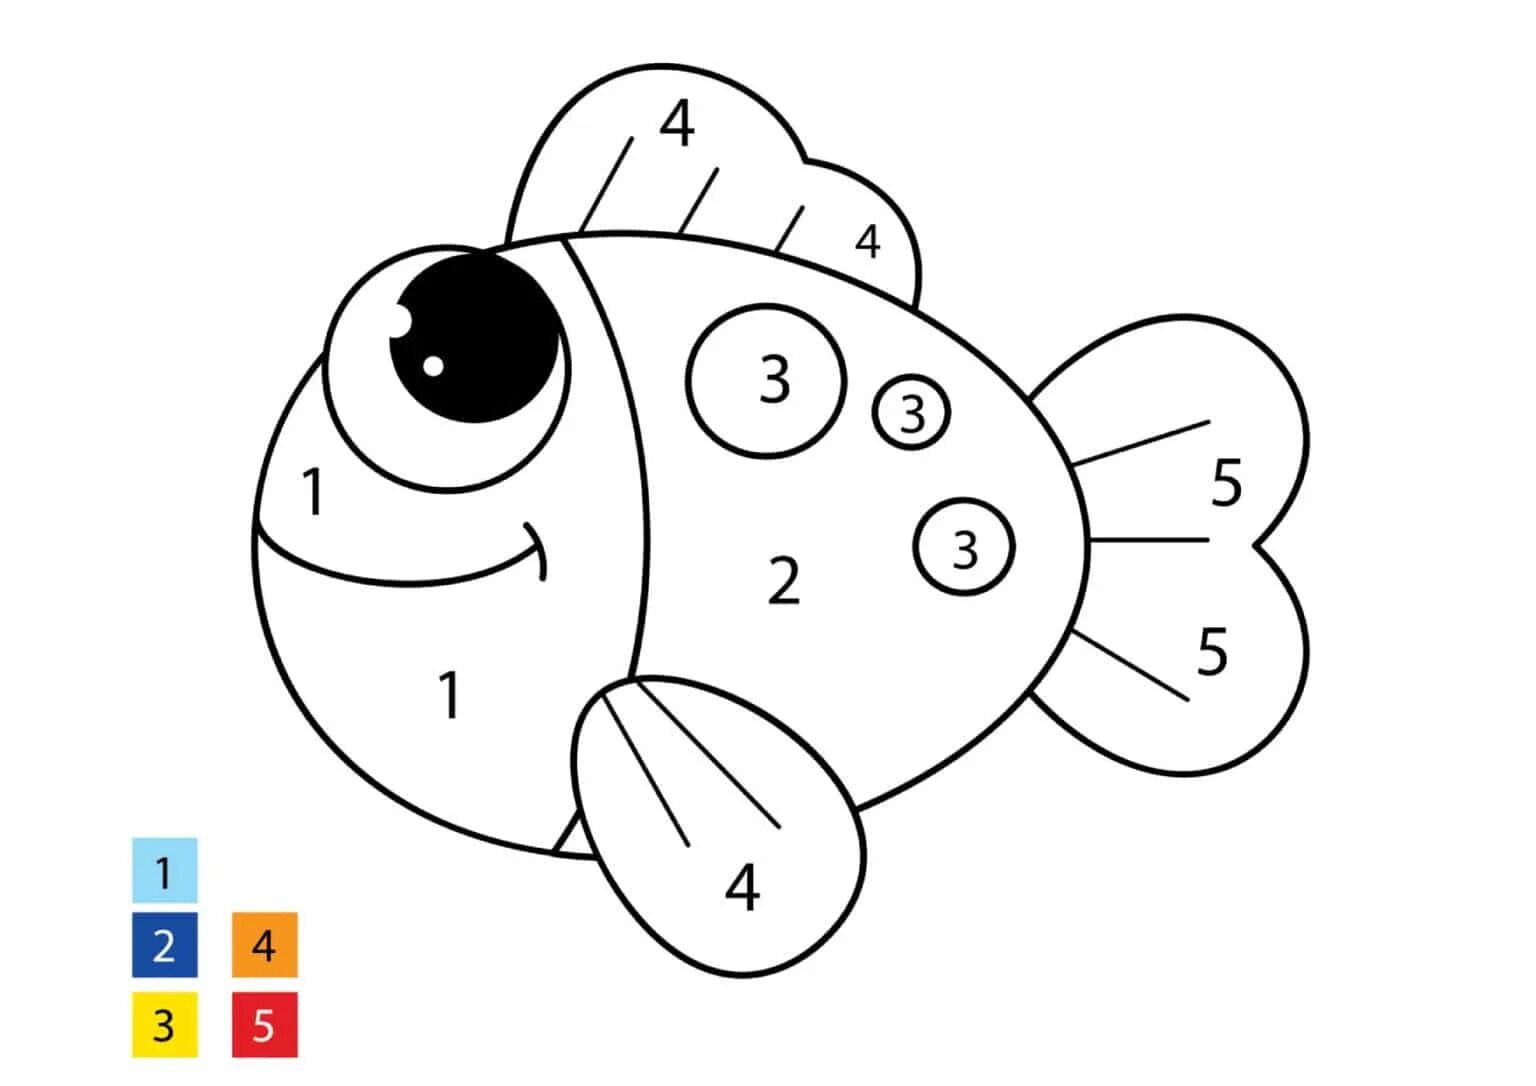 By numbers fish #4